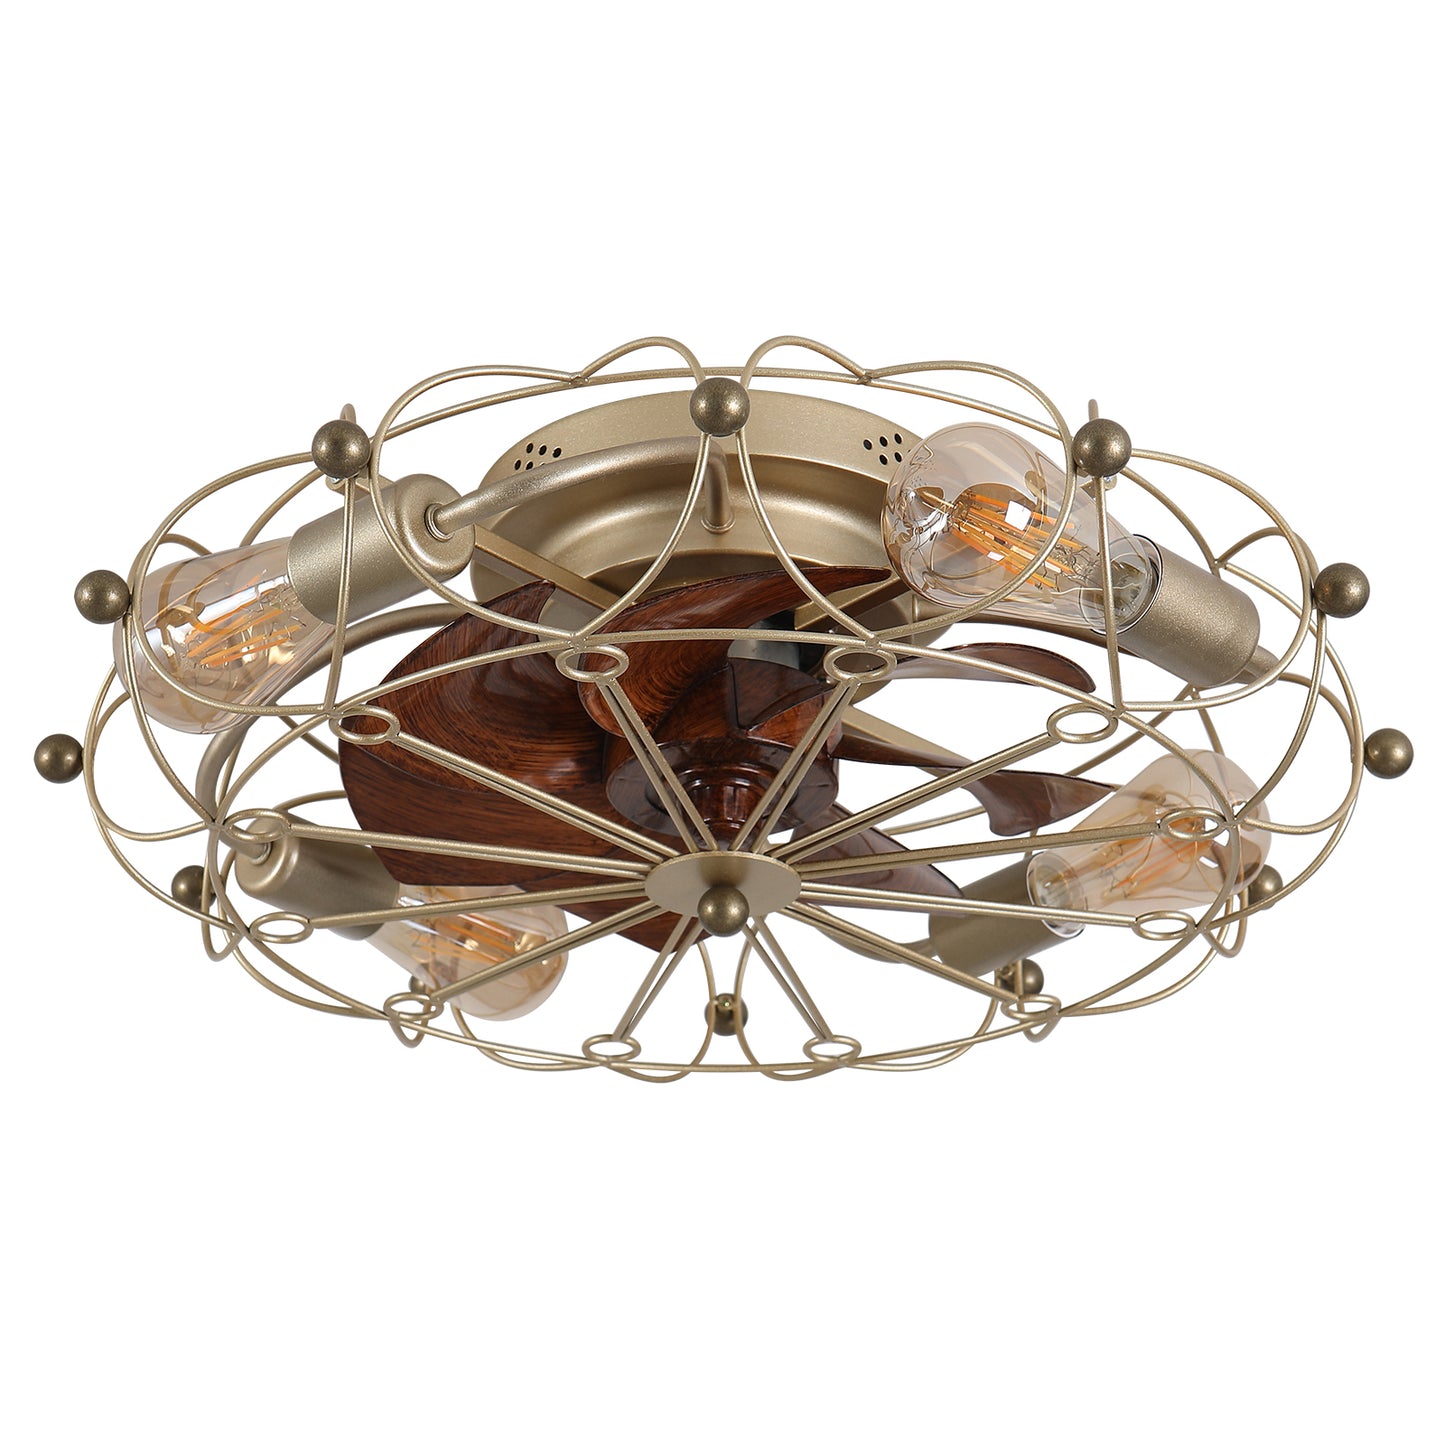 Modern Industrial Rustic Ceiling Fan with Embedded Caged Design and Remote-Controlled Lights